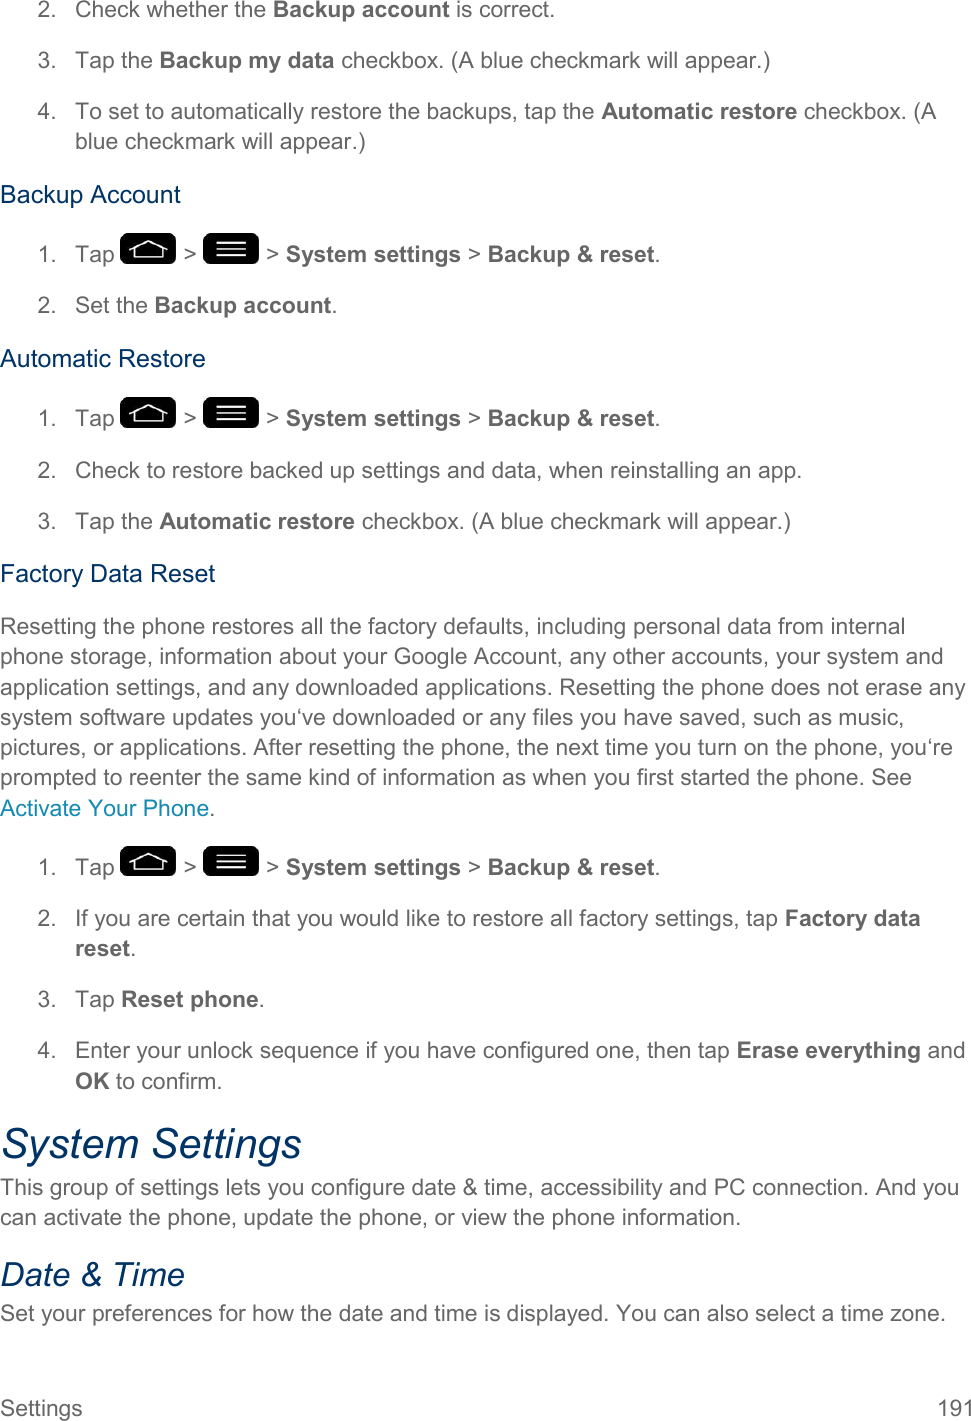 Settings  191 2.  Check whether the Backup account is correct. 3.  Tap the Backup my data checkbox. (A blue checkmark will appear.) 4.  To set to automatically restore the backups, tap the Automatic restore checkbox. (A blue checkmark will appear.) Backup Account 1.  Tap   &gt;   &gt; System settings &gt; Backup &amp; reset. 2.  Set the Backup account. Automatic Restore 1.  Tap   &gt;   &gt; System settings &gt; Backup &amp; reset. 2.  Check to restore backed up settings and data, when reinstalling an app. 3.  Tap the Automatic restore checkbox. (A blue checkmark will appear.) Factory Data Reset Resetting the phone restores all the factory defaults, including personal data from internal phone storage, information about your Google Account, any other accounts, your system and application settings, and any downloaded applications. Resetting the phone does not erase any system software updates you‘ve downloaded or any files you have saved, such as music, pictures, or applications. After resetting the phone, the next time you turn on the phone, you‘re prompted to reenter the same kind of information as when you first started the phone. See Activate Your Phone. 1.  Tap   &gt;   &gt; System settings &gt; Backup &amp; reset. 2.  If you are certain that you would like to restore all factory settings, tap Factory data reset. 3.  Tap Reset phone. 4.  Enter your unlock sequence if you have configured one, then tap Erase everything and OK to confirm. System Settings This group of settings lets you configure date &amp; time, accessibility and PC connection. And you can activate the phone, update the phone, or view the phone information. Date &amp; Time Set your preferences for how the date and time is displayed. You can also select a time zone. 